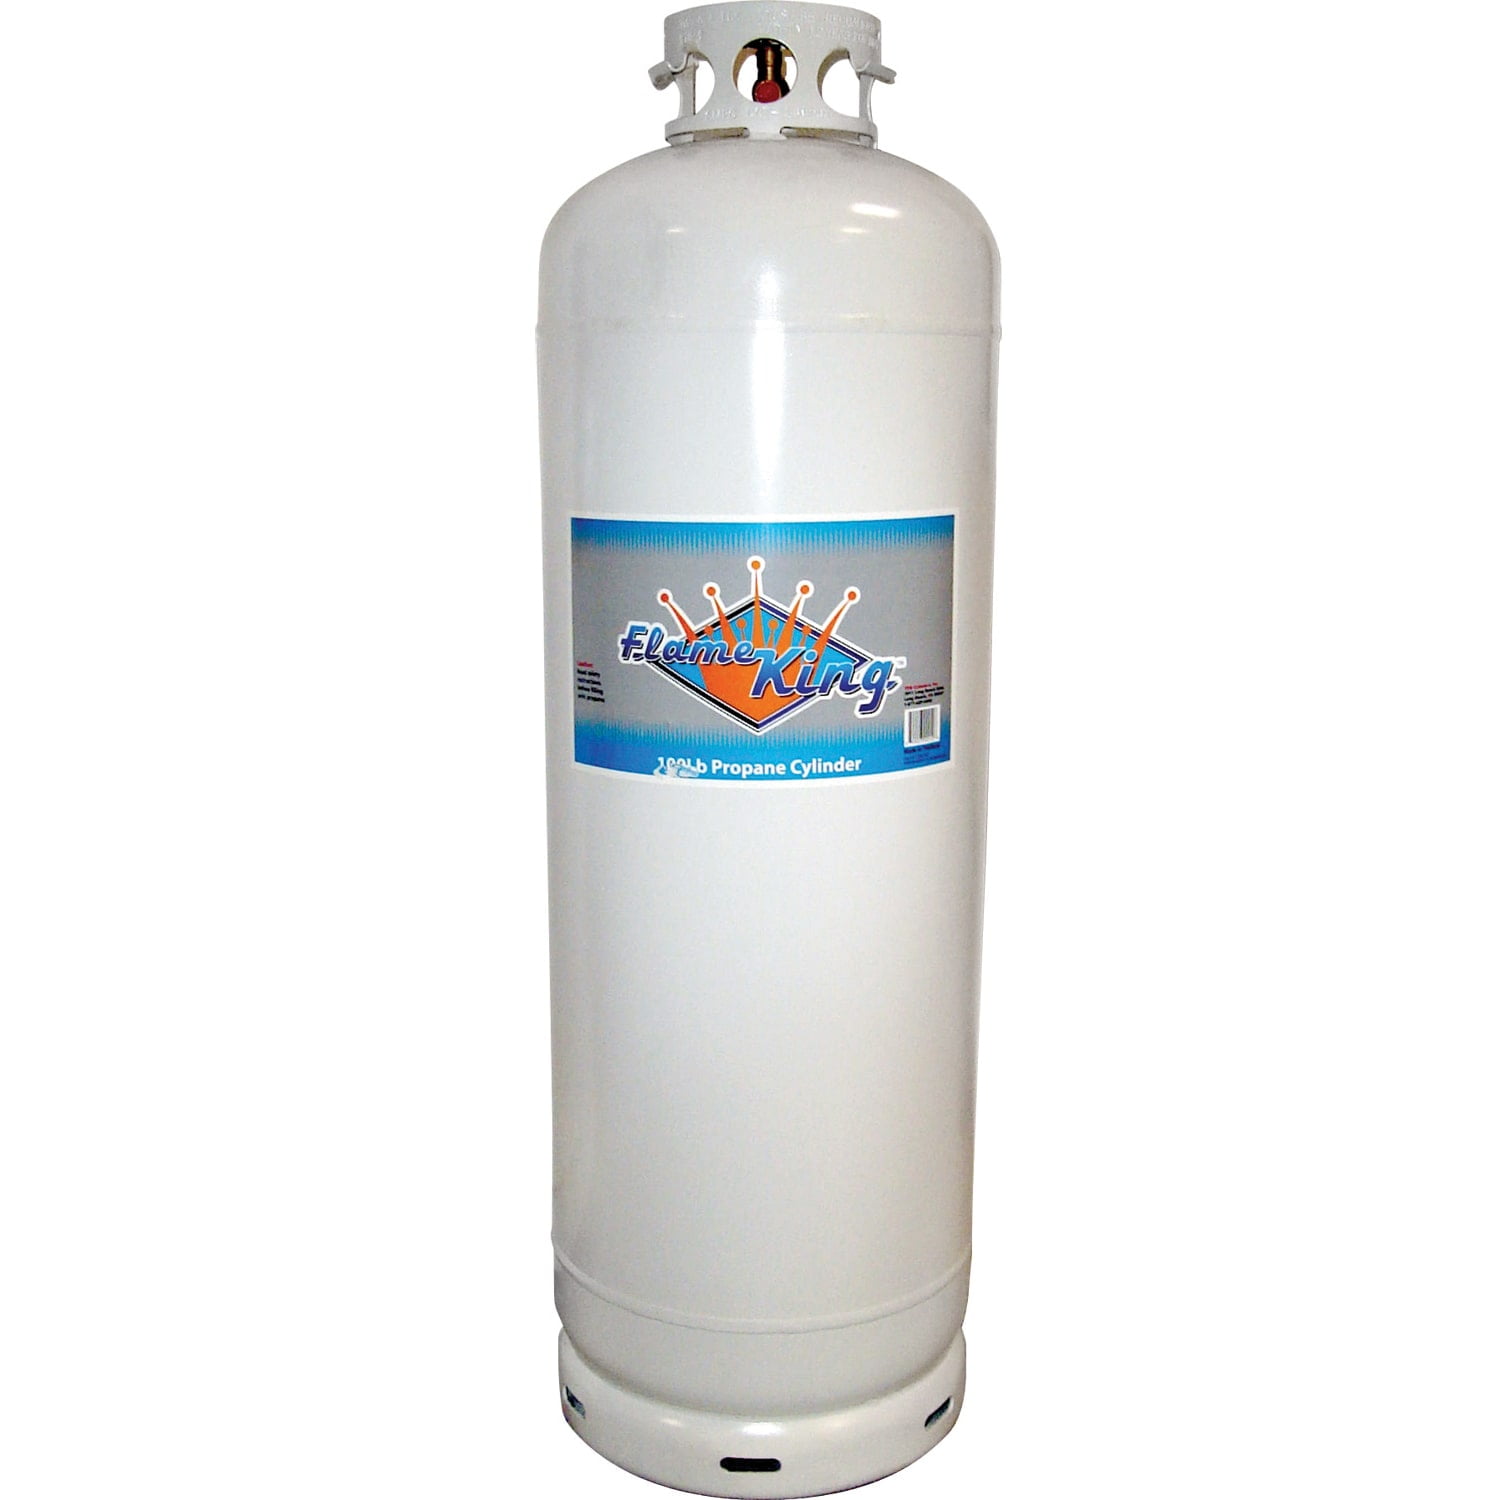 Flame King 100 Lb Steel Propane Cylinder With POL Valve Ships Empty